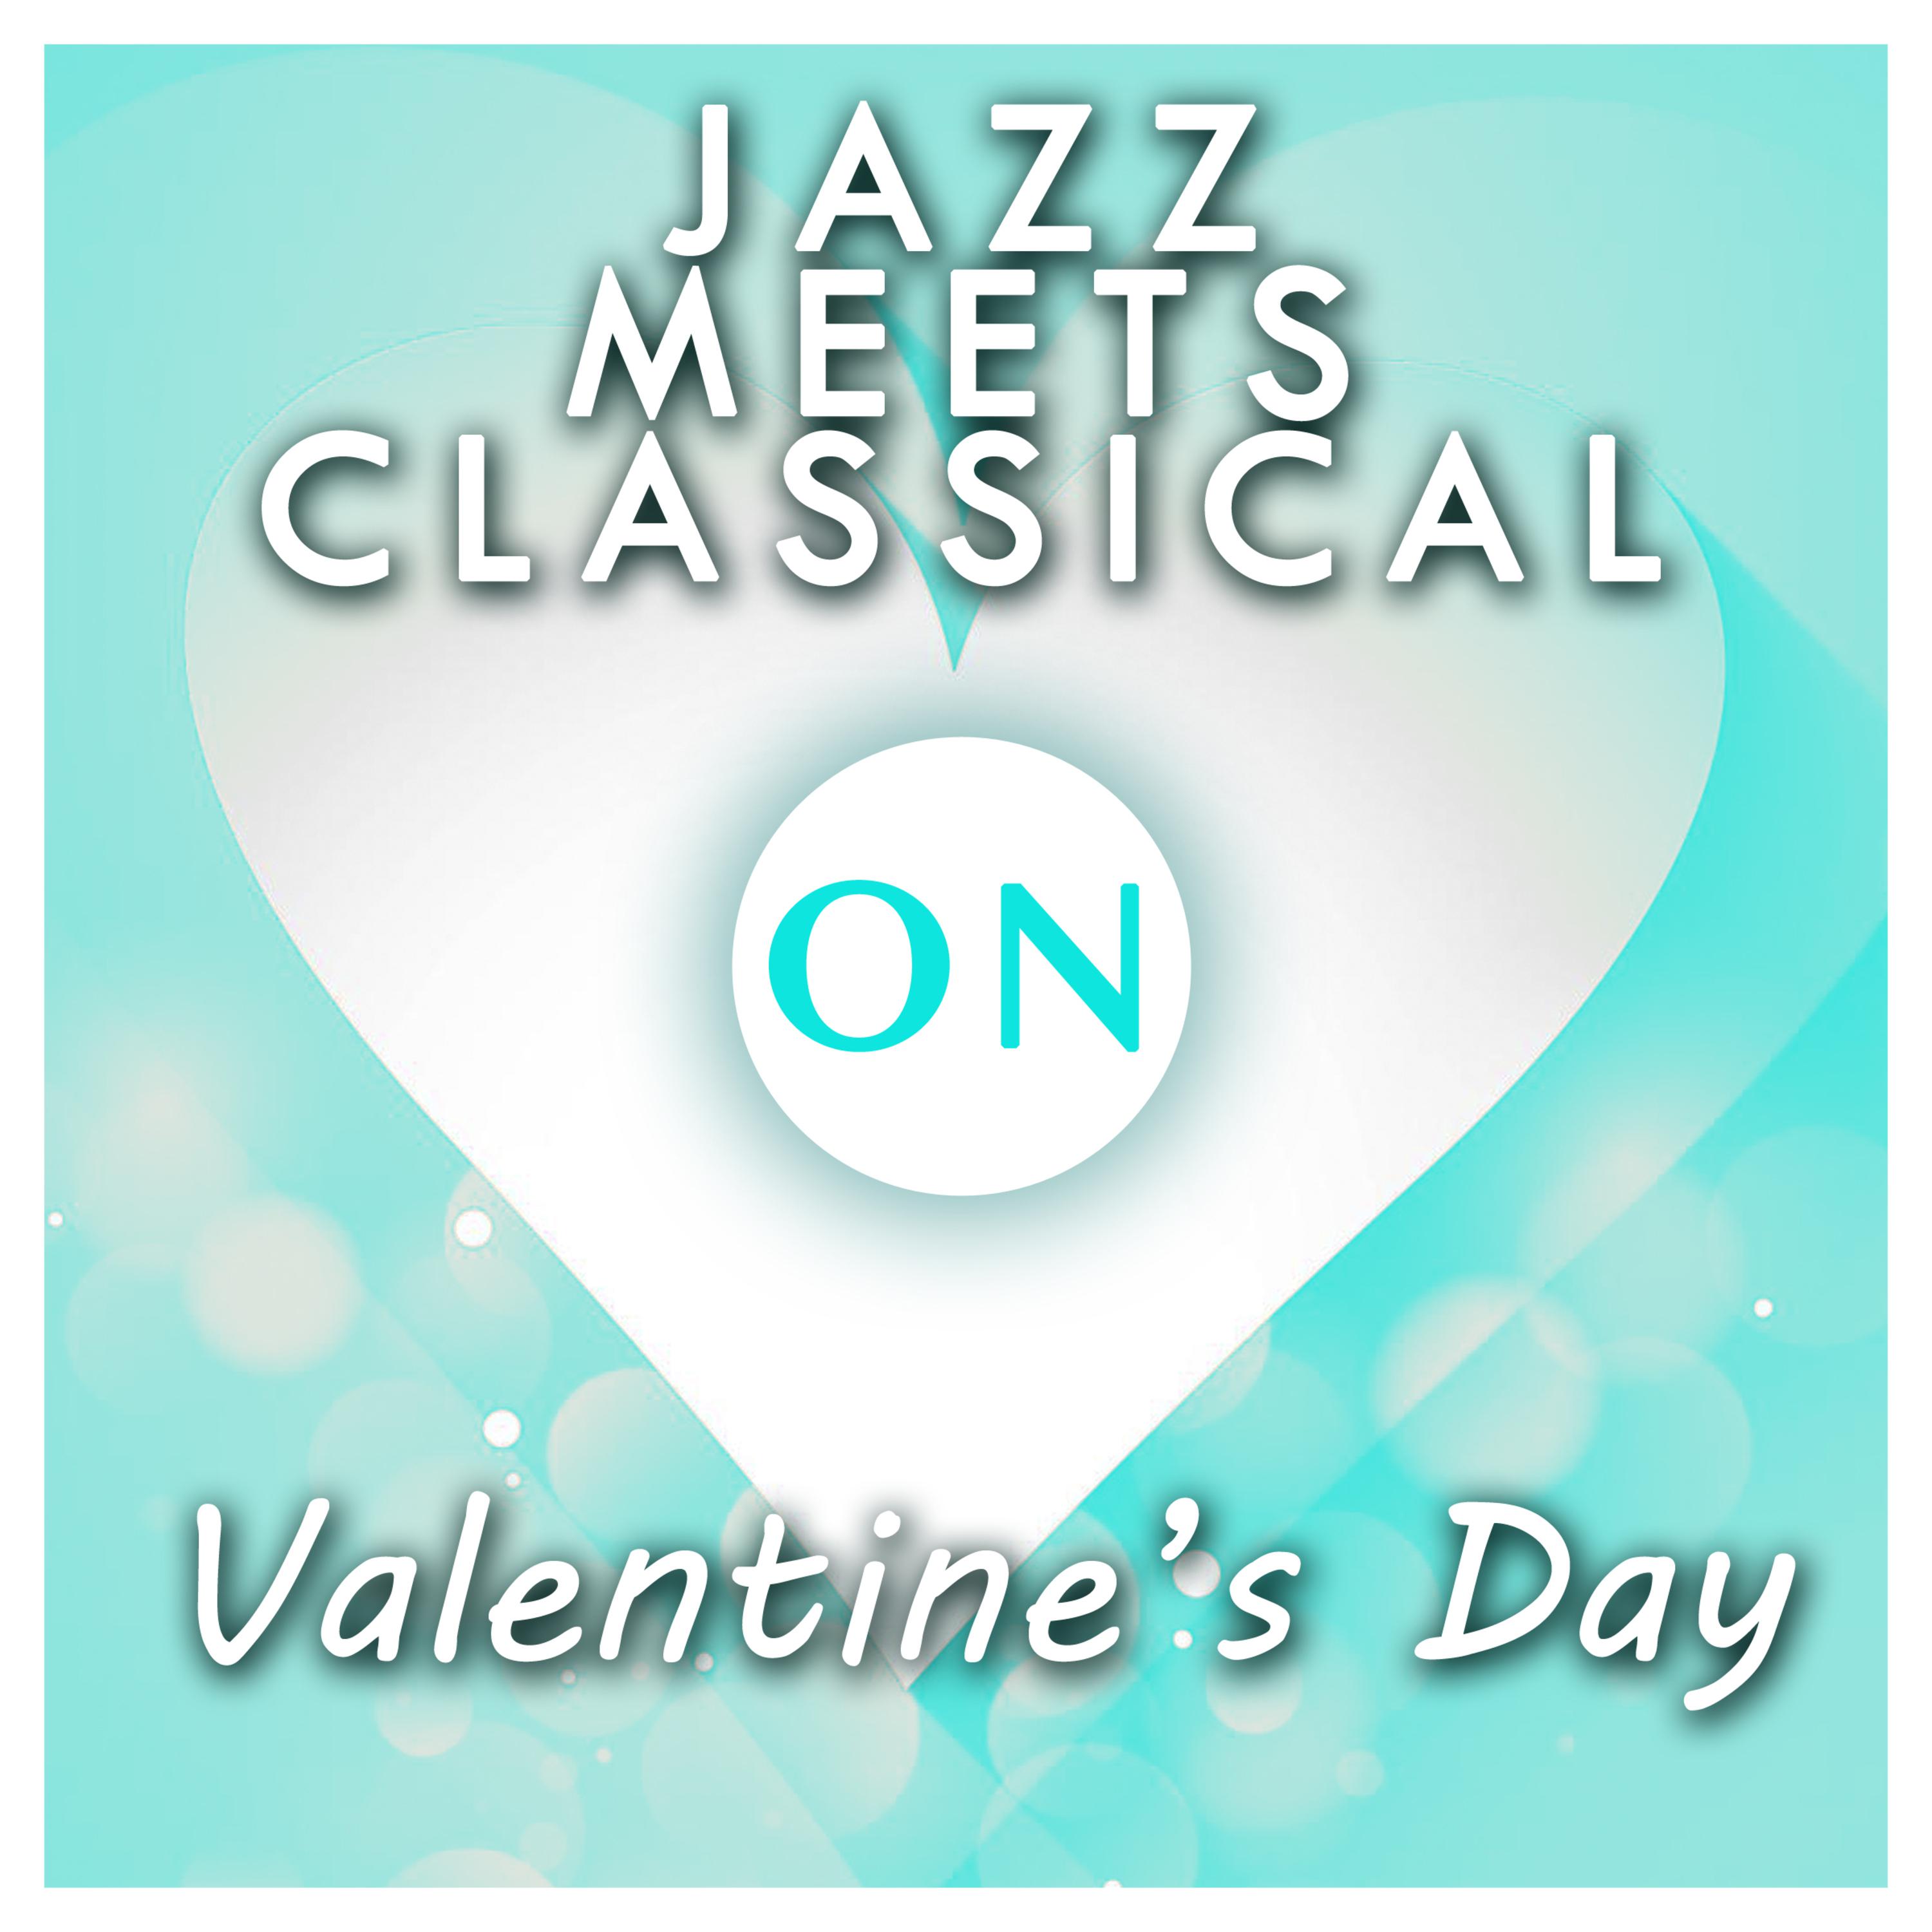 Jazz Meets Classical On Valentine's Day